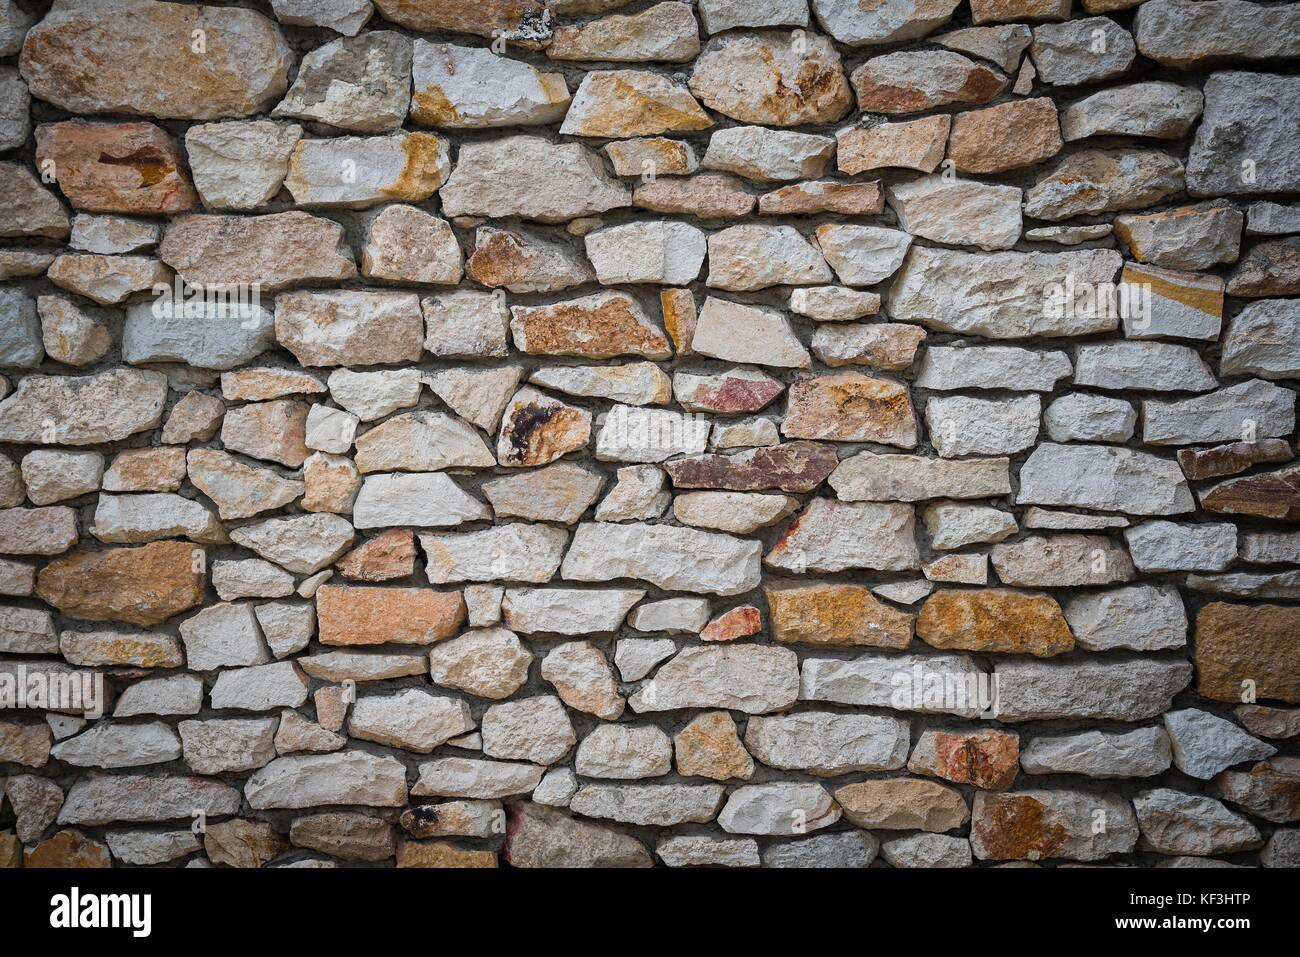 Stone wall background of colorful stones Stock Photo